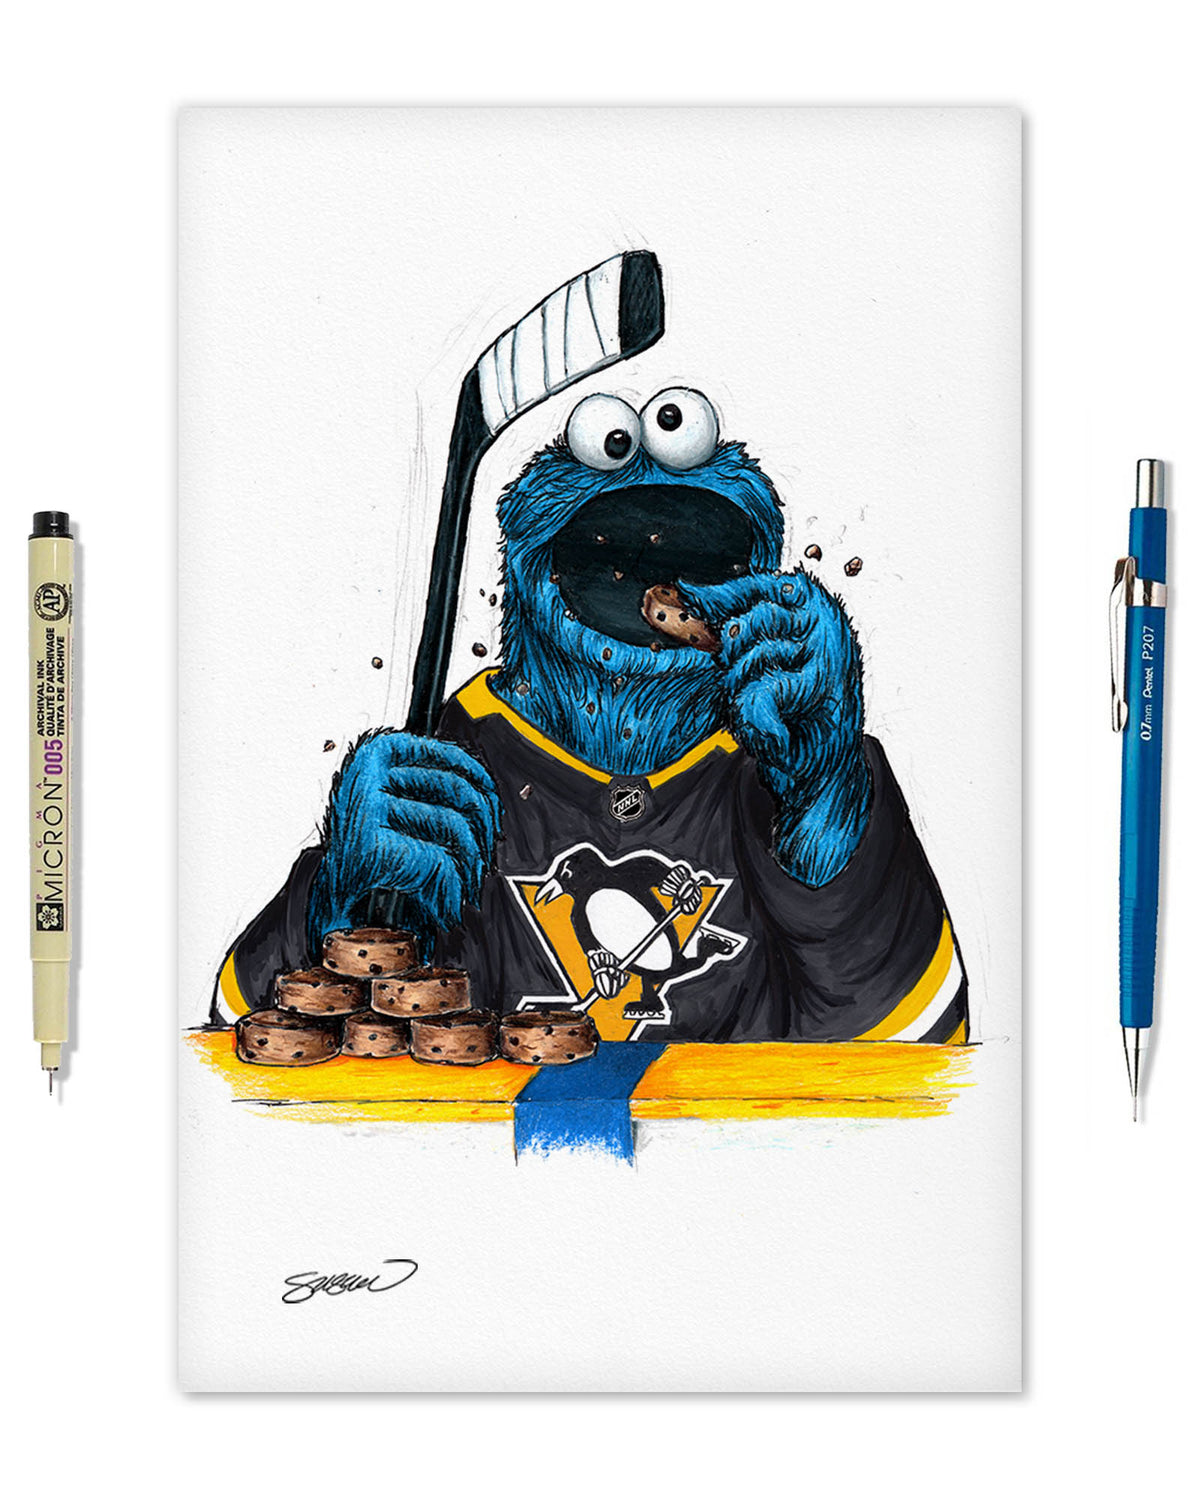 Cookie Monster x NHL Penguins Limited Edition Fine Art Print